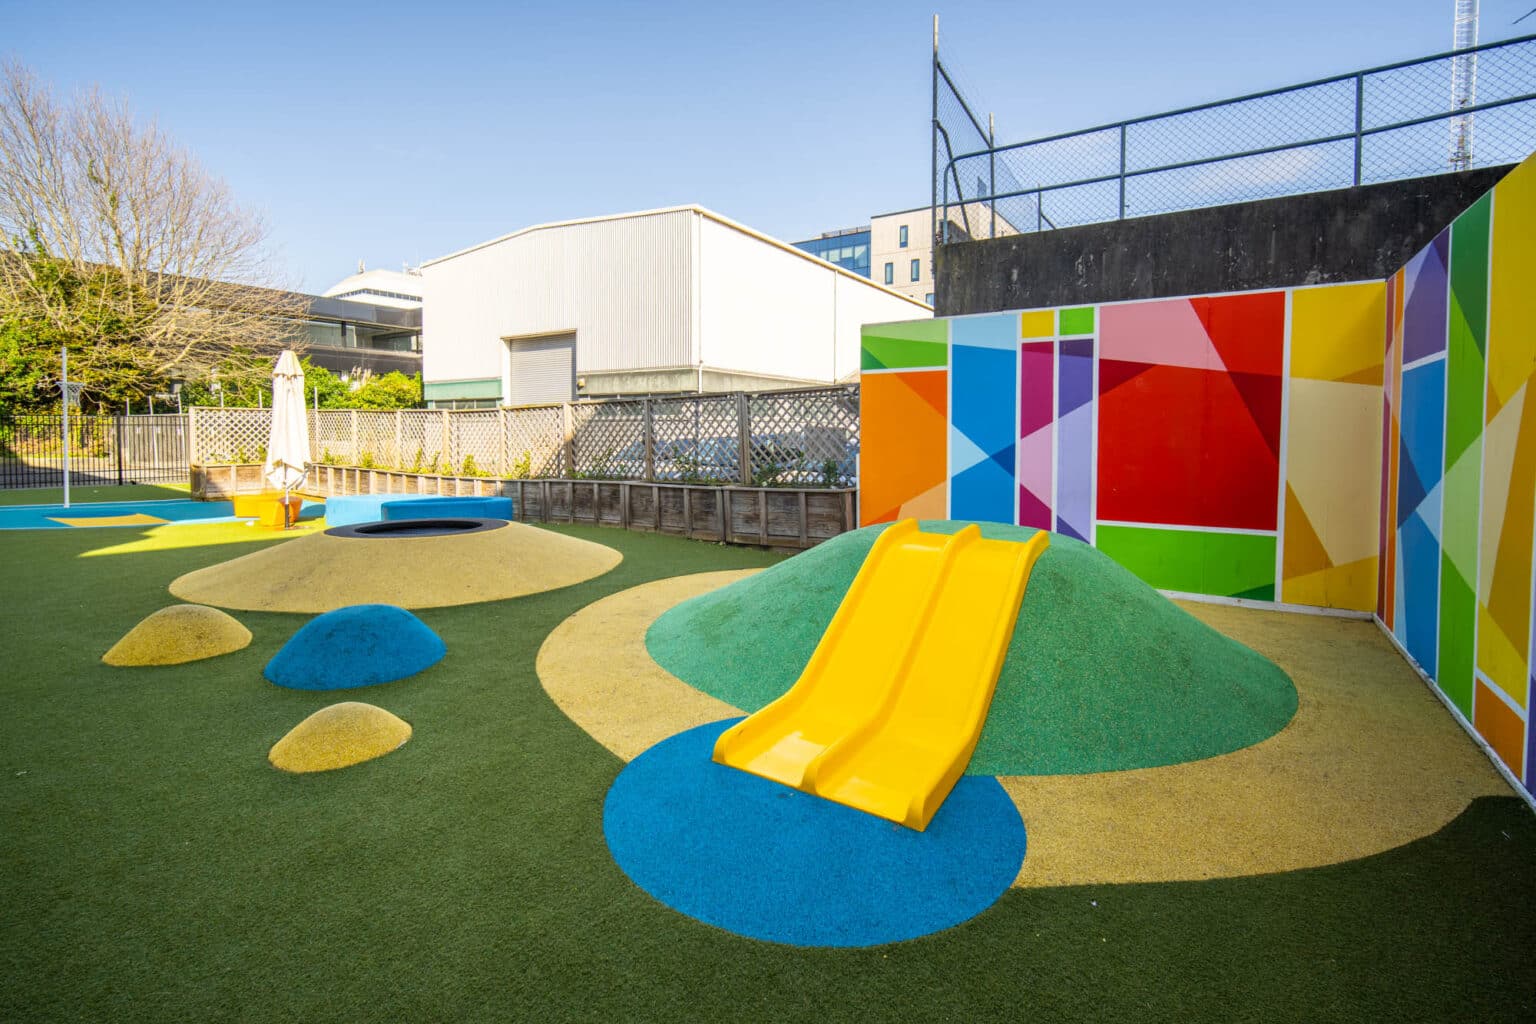 Vibrant colours are great fro a childcare playground.